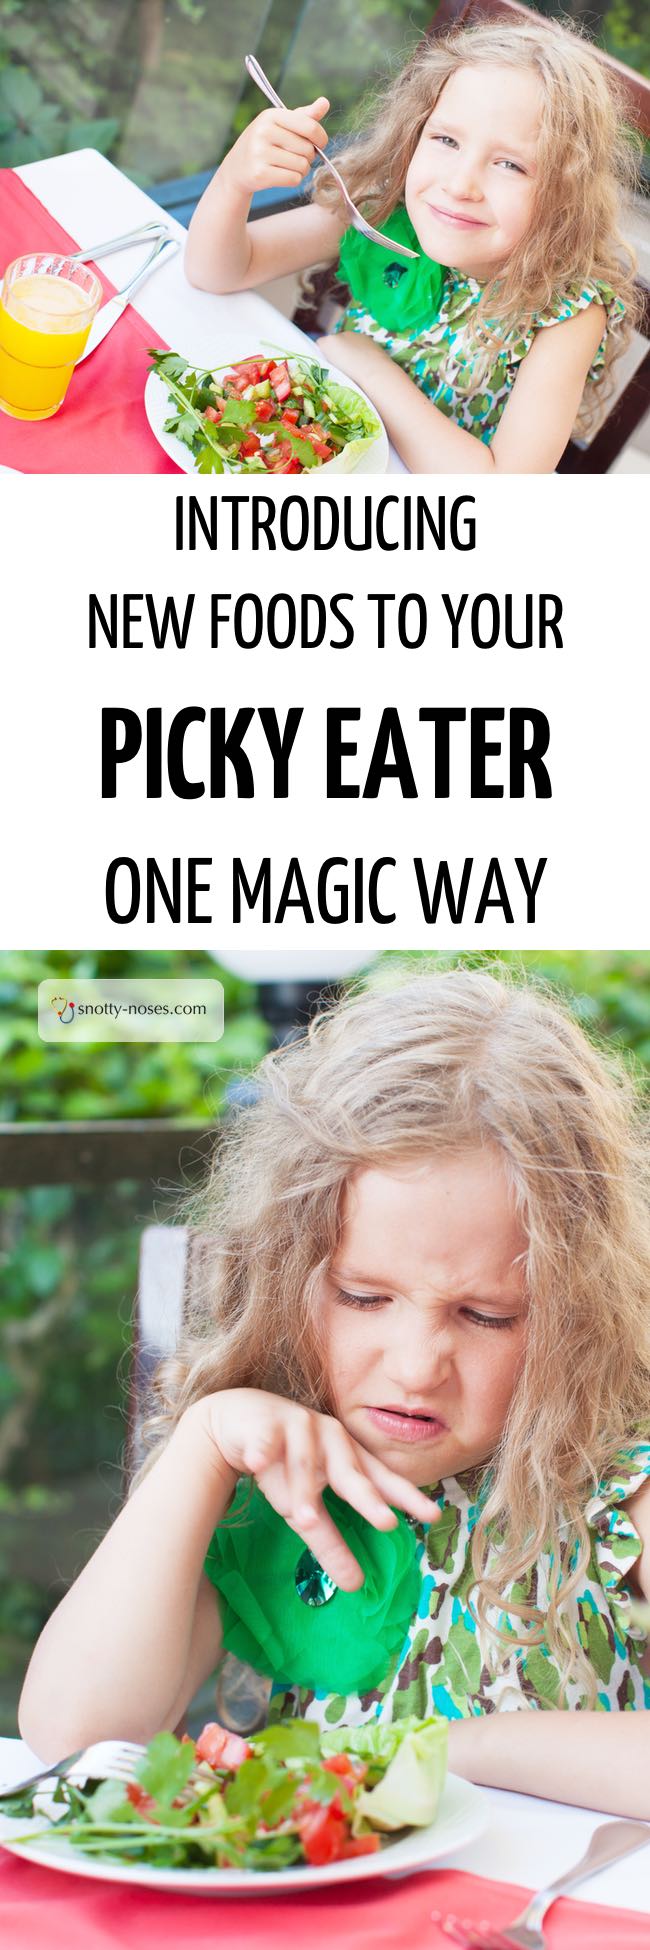 Introducing new foods to your picky or fussy eater. This is one easy way to introduce new foods to kids that really works. I wish I'd done it 2 years ago!